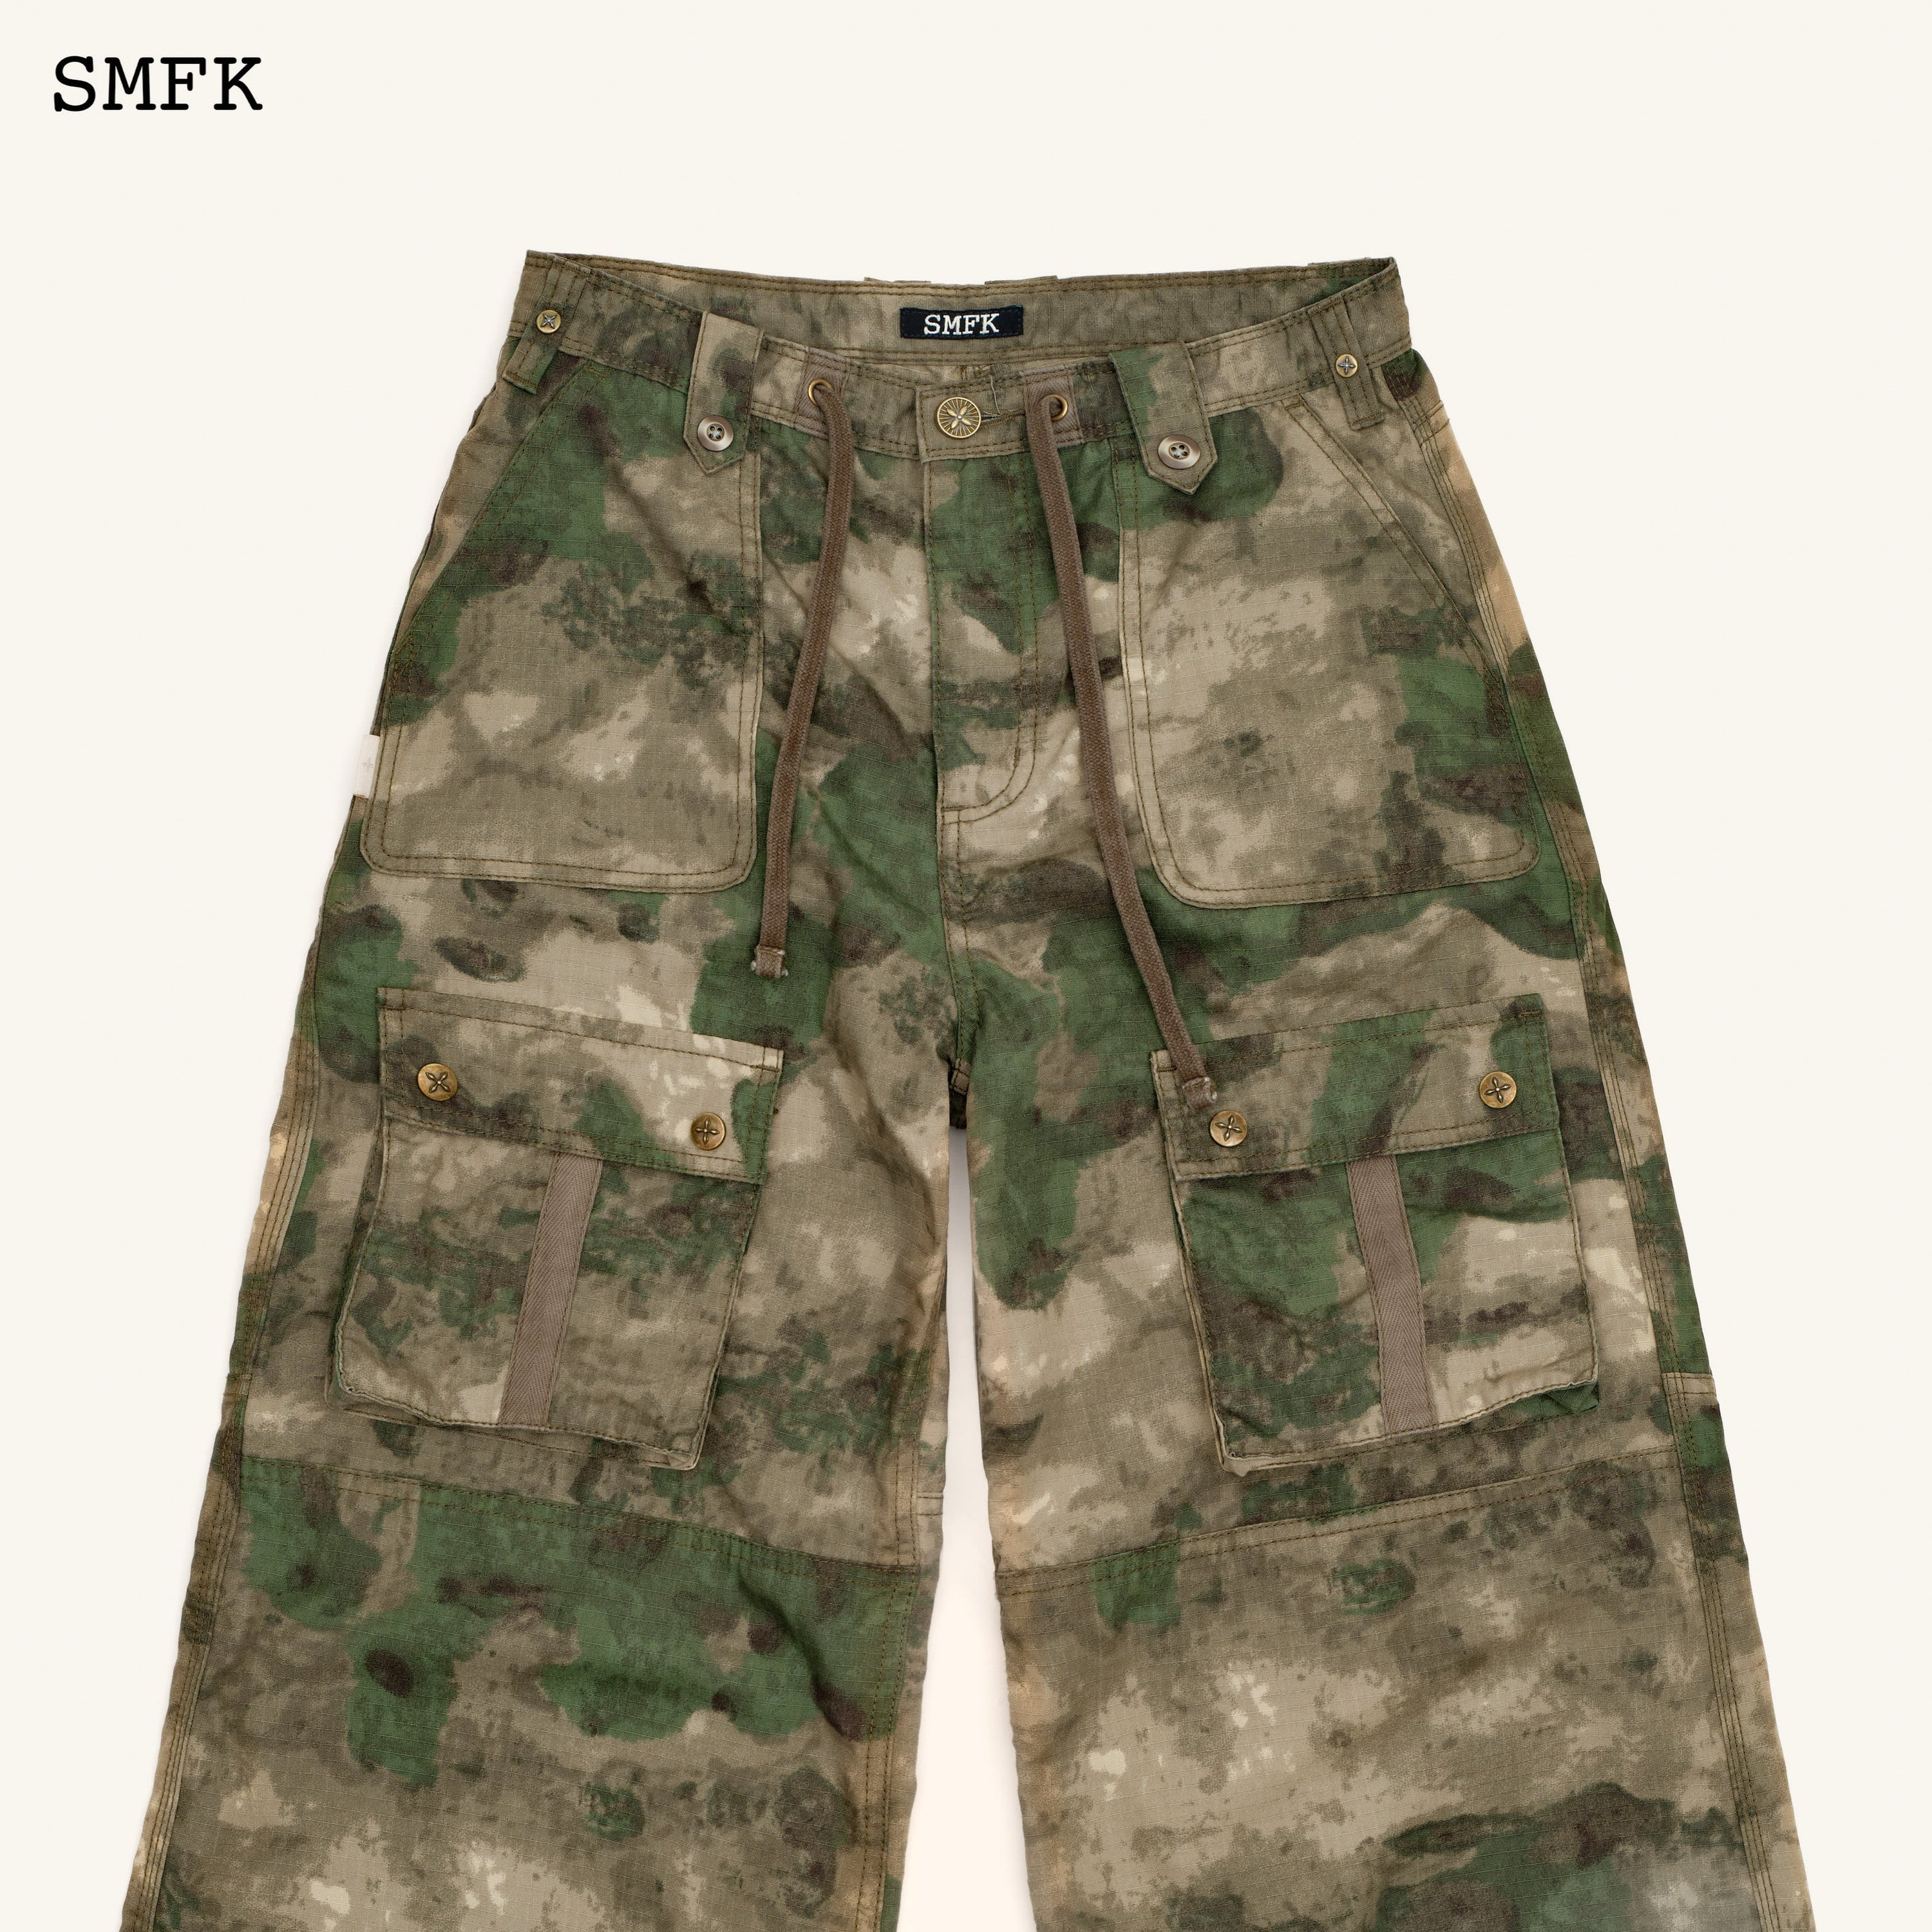 Ancient Myth Viper Thermal Camouflage Hiking Pants - SMFK Official